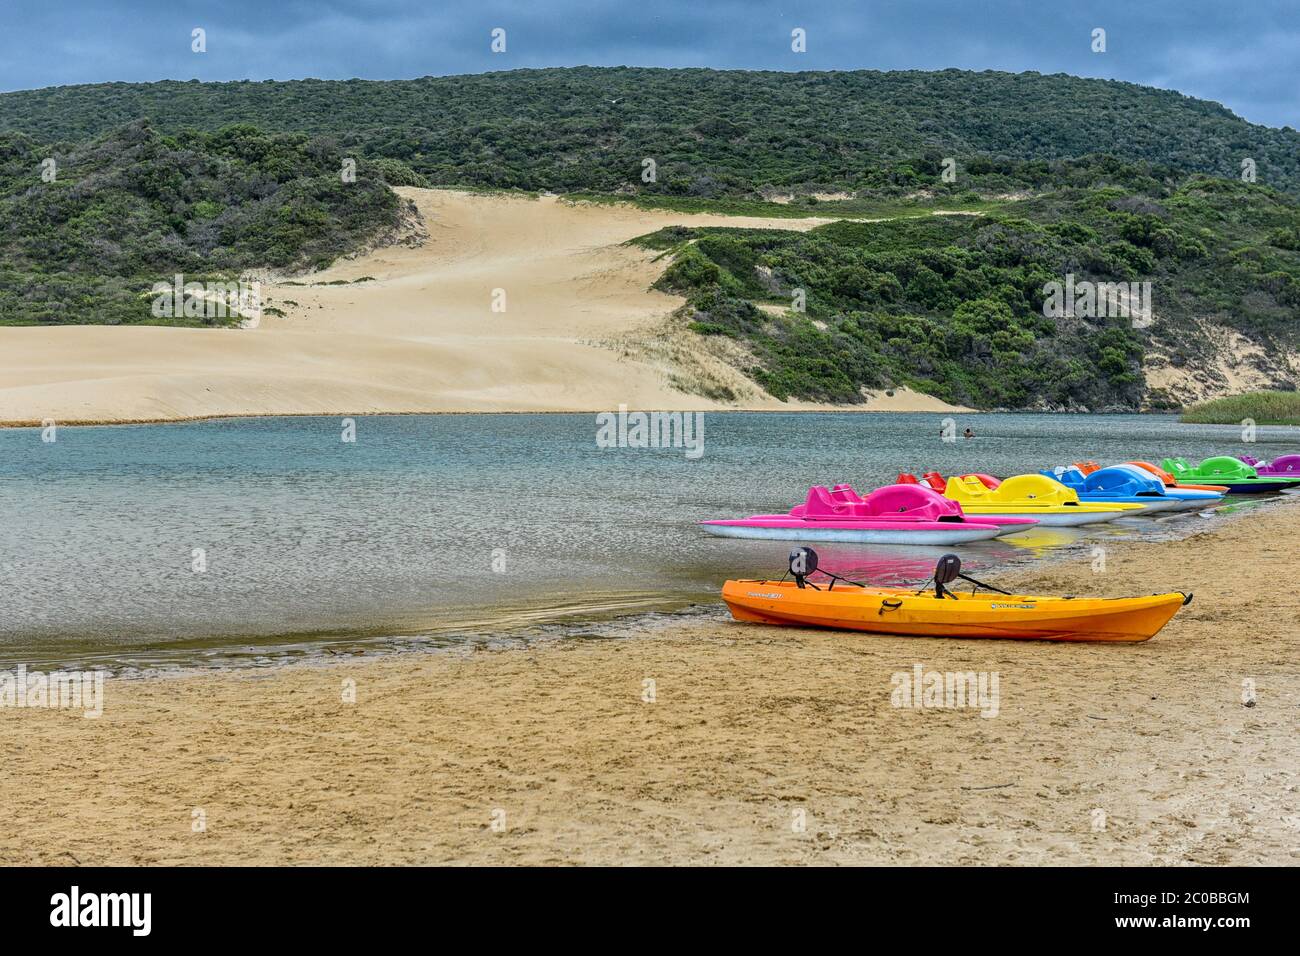 Van Stadens River Mouth is a popular attraction near Port Elizabeth, Eastern Cape, South Africa Stock Photo